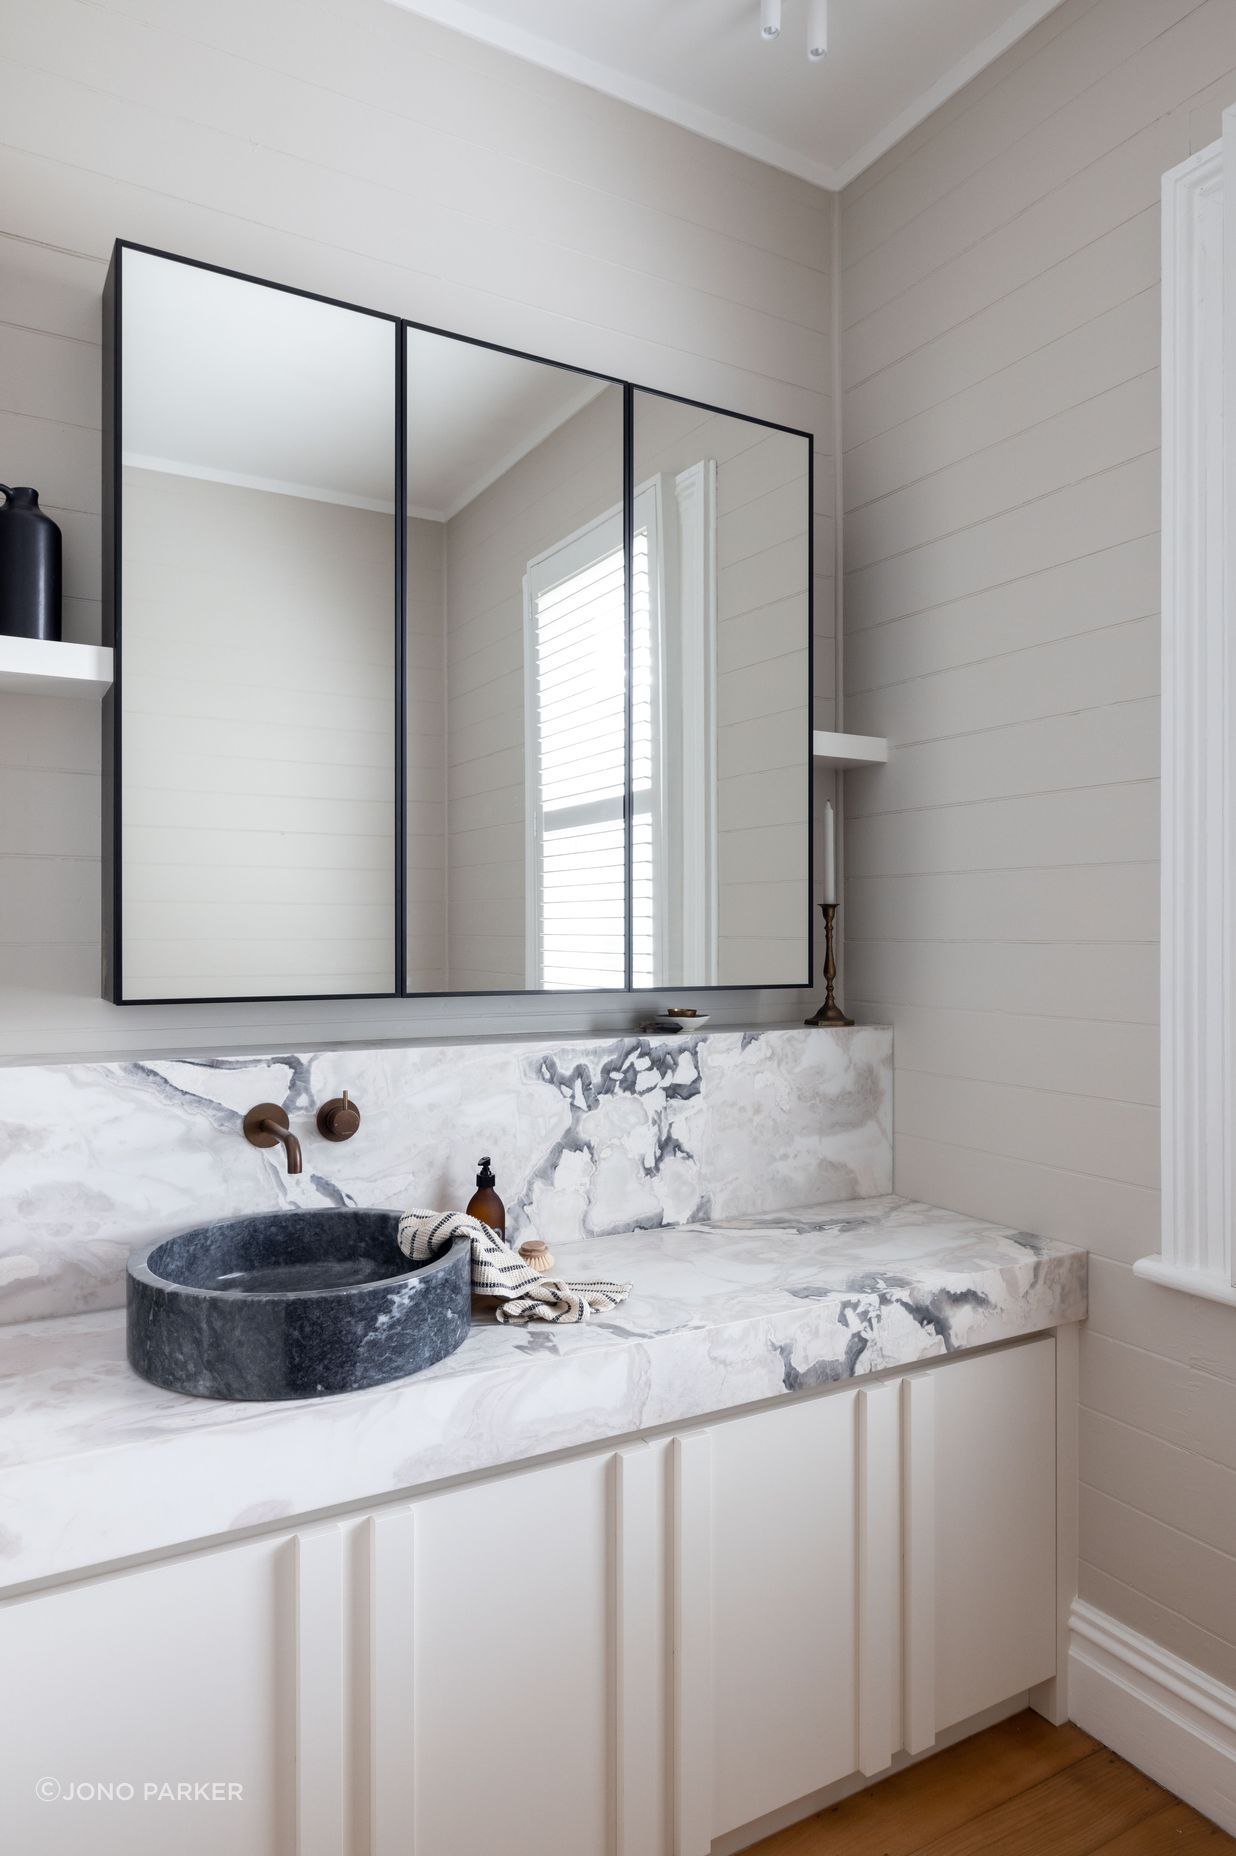 The original shiplap has been retained in the bathroom to honour the home's heritage.